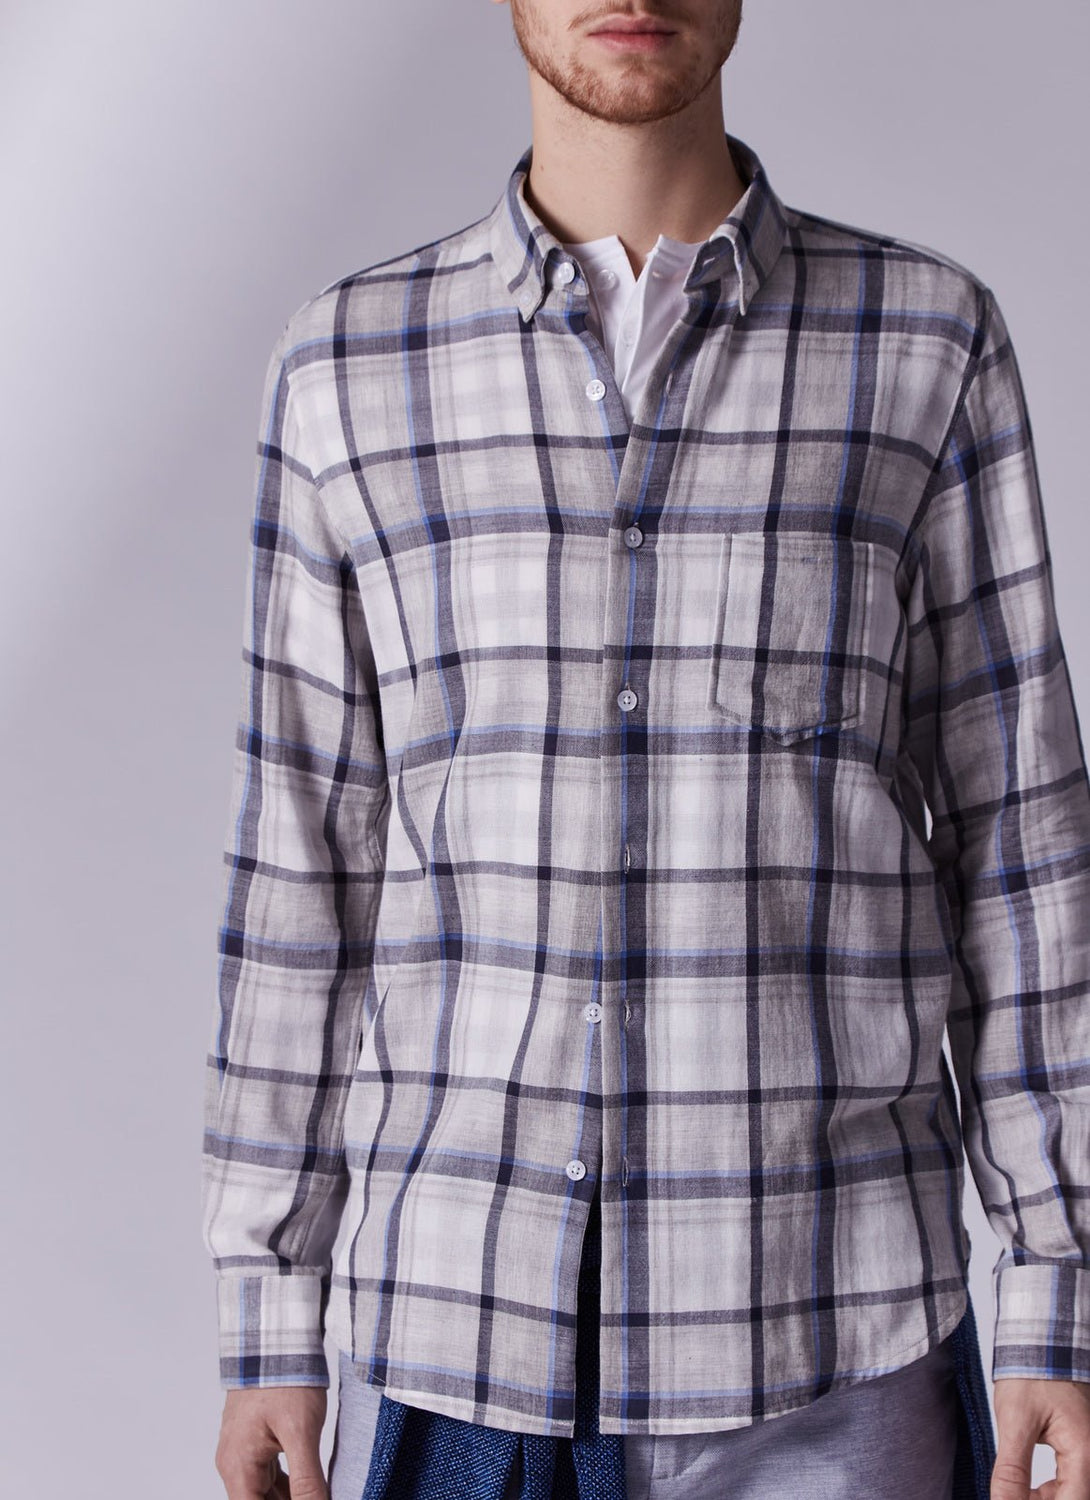 Men Long-Sleeve Shirt | Double-Faced Checked Shir by Spanish designer Adolfo Dominguez